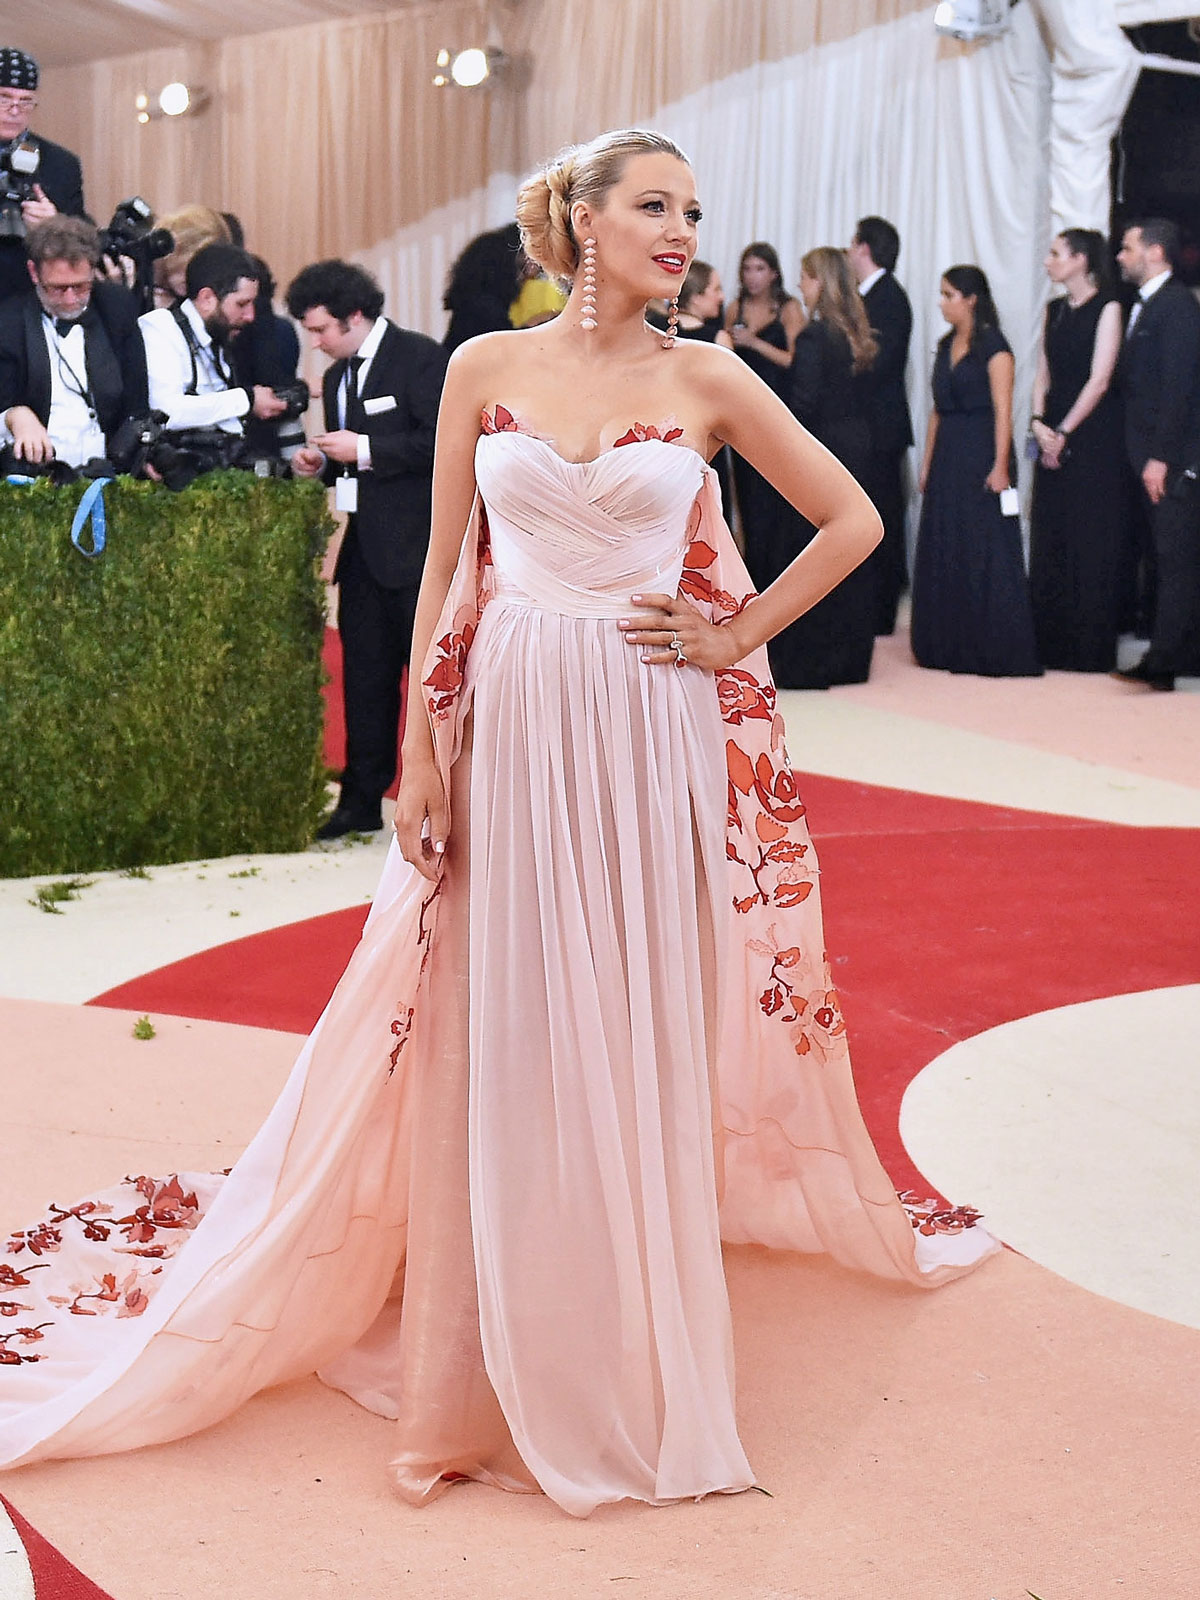 Blake Lively wears a strapless pink gown with a train